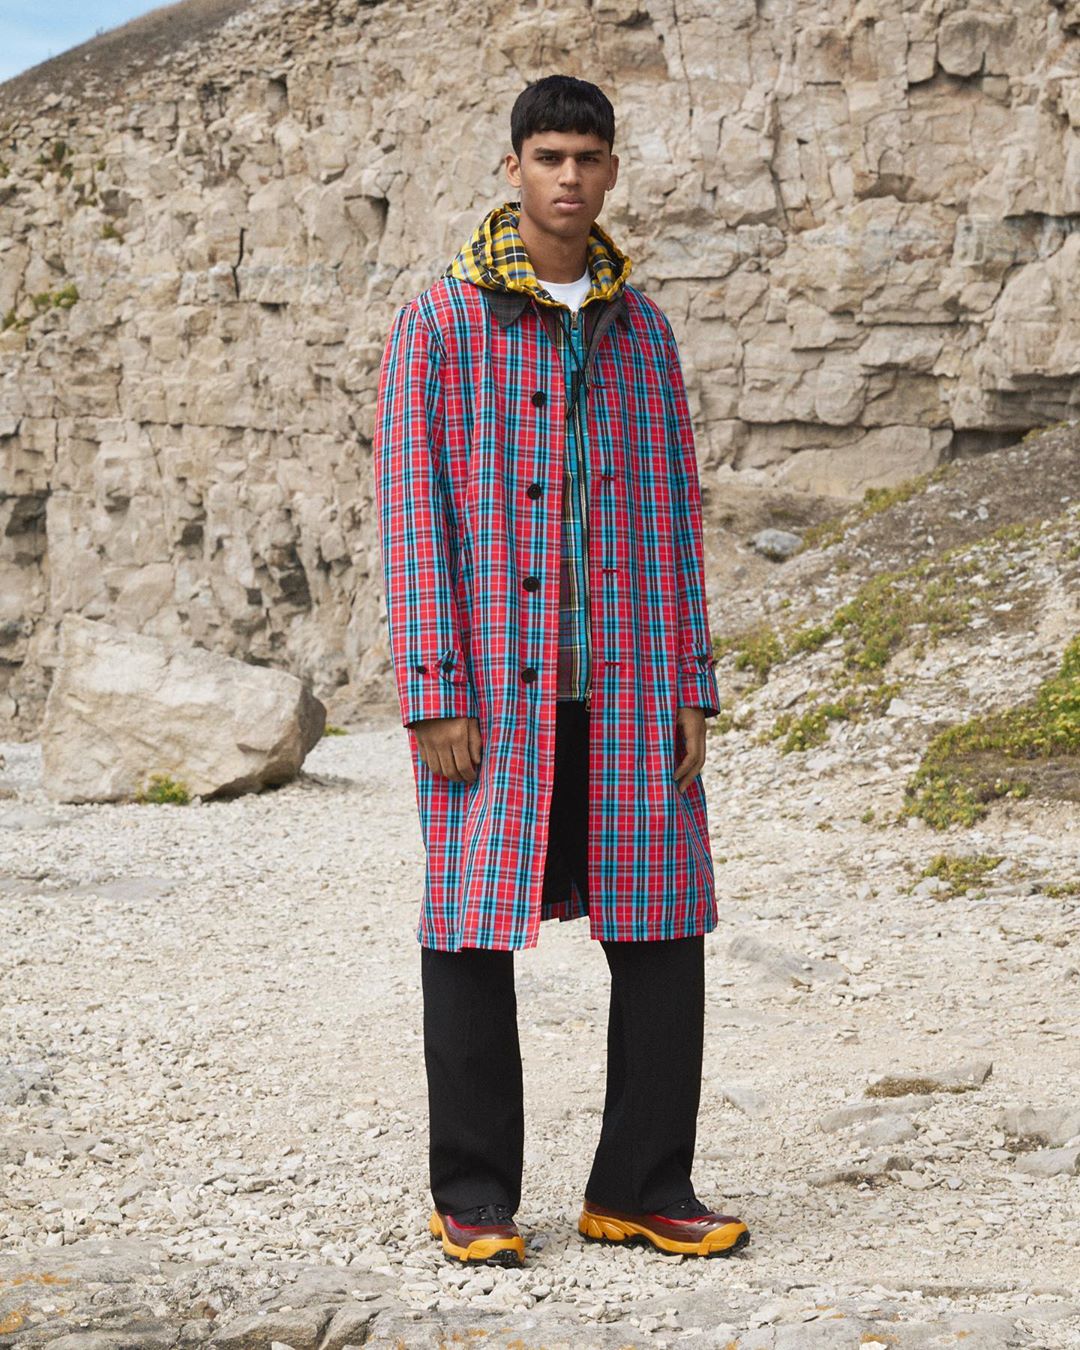 Burberry - Trailblazer
.
Discover our rainwear collection reimaged by #RiccardoTisci - including a new iteration of our car coat in vivid check
.
#Burberry